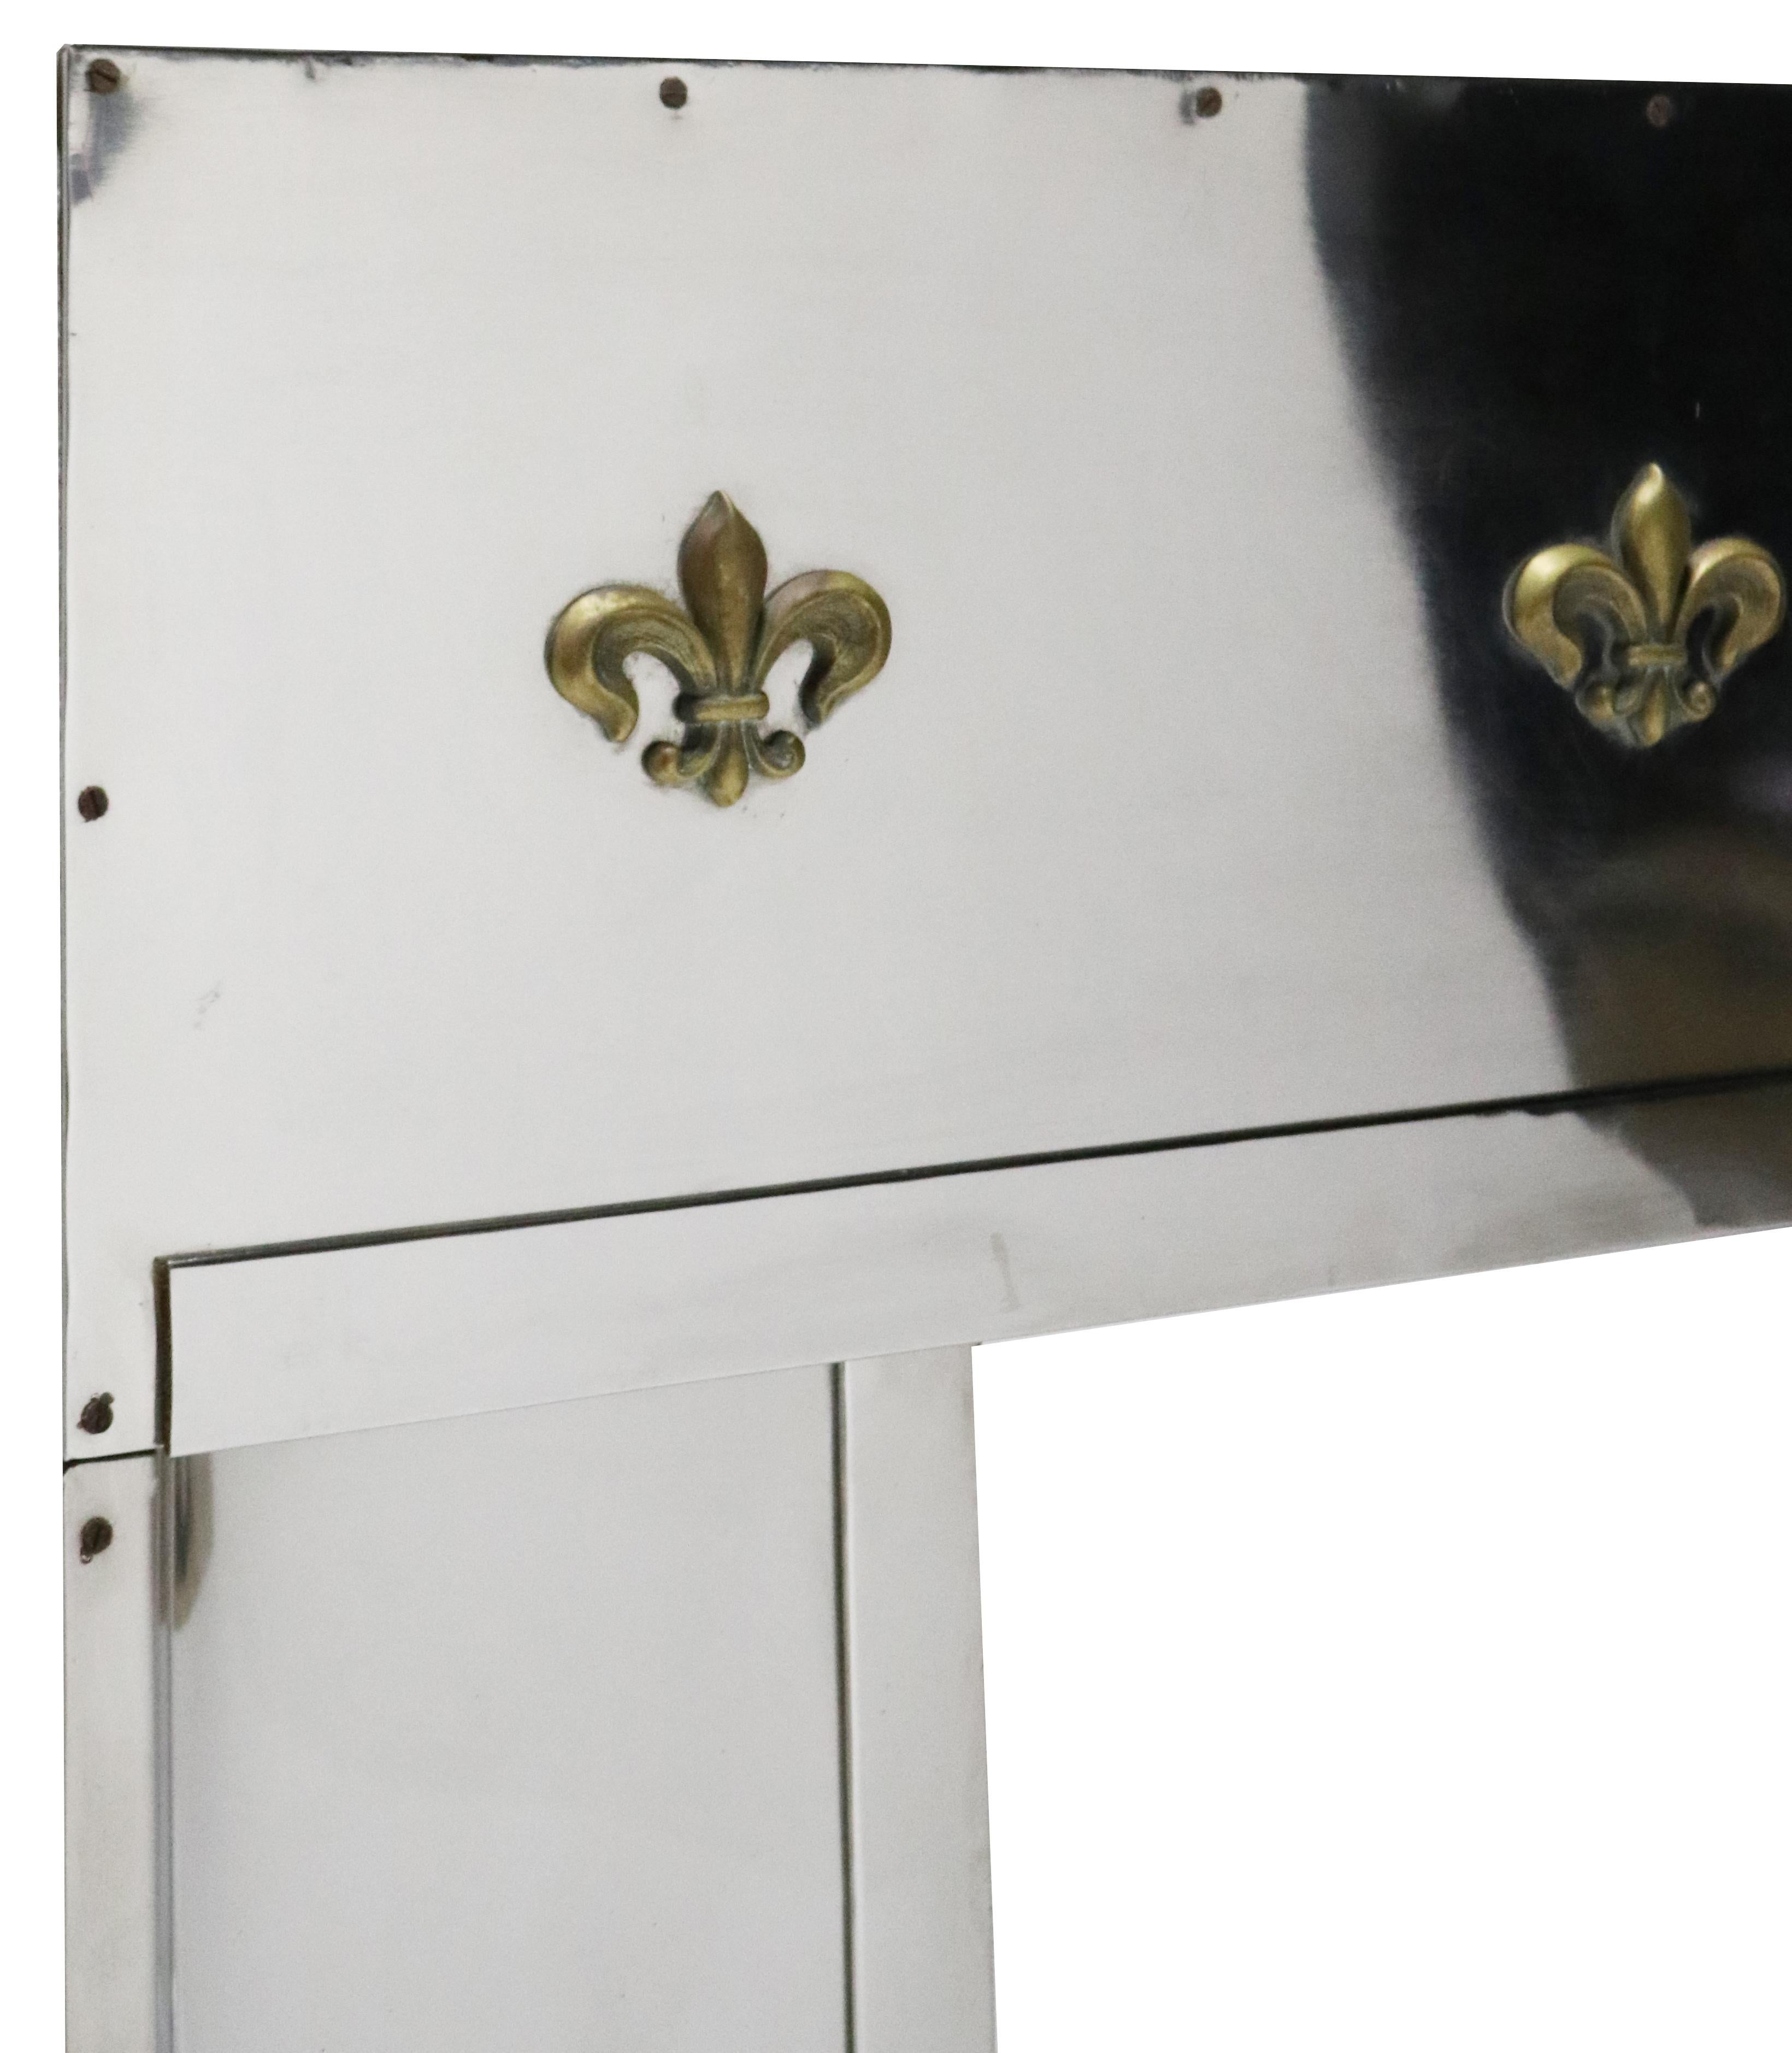 An original Art Deco fire insert constructed from stainless steel with brass embellishments.

Additional Dimensions:

Opening Height 51.5 cm

Opening width 41 cm